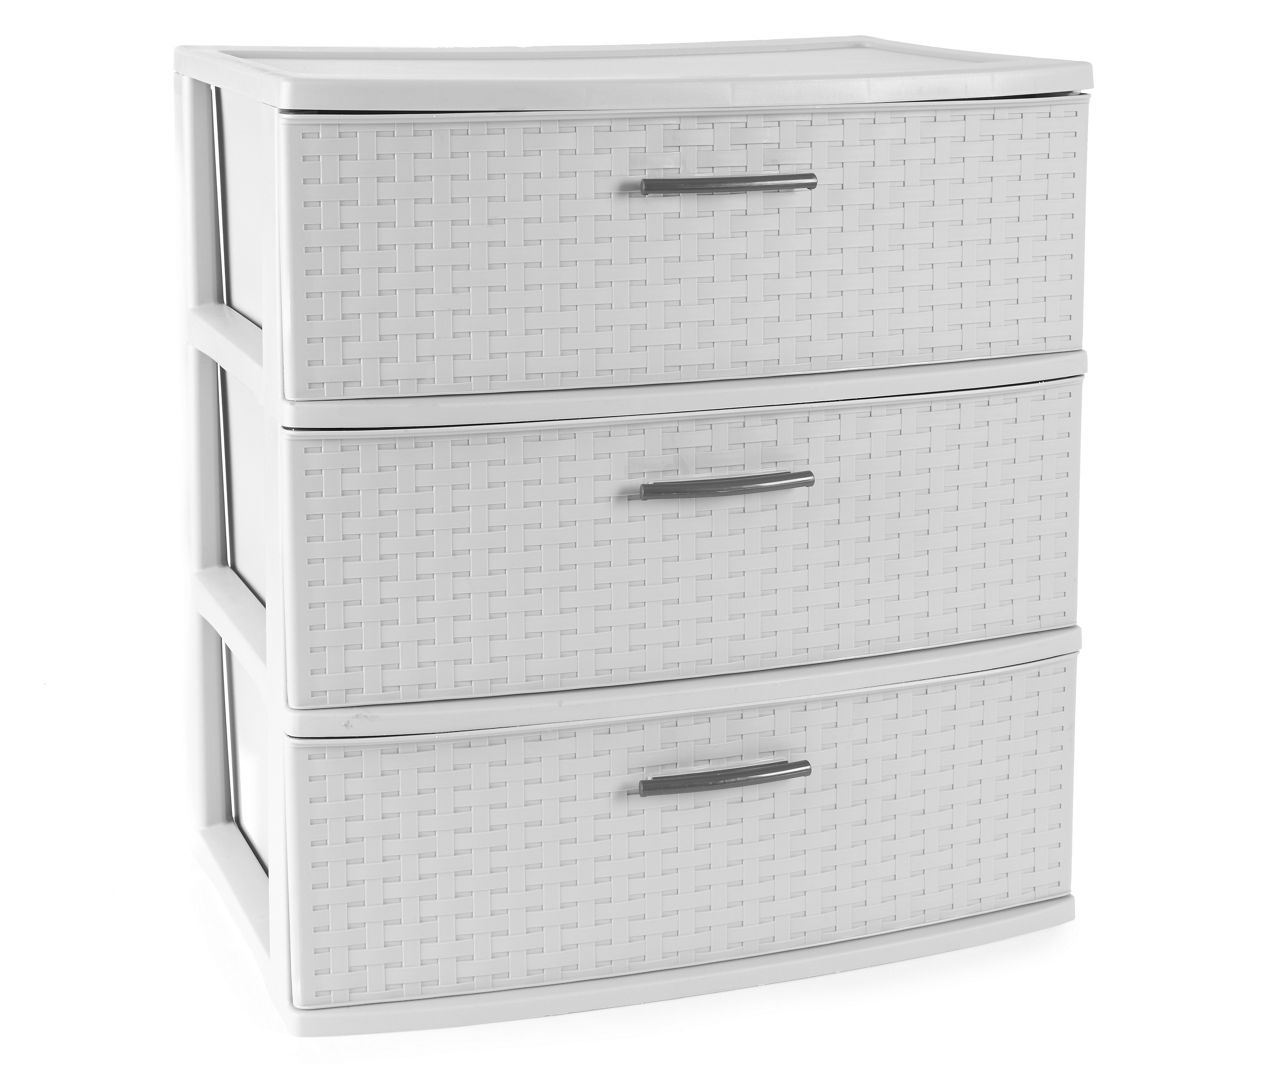 Sterilite Gray 3-Drawer Wide Weave Tower